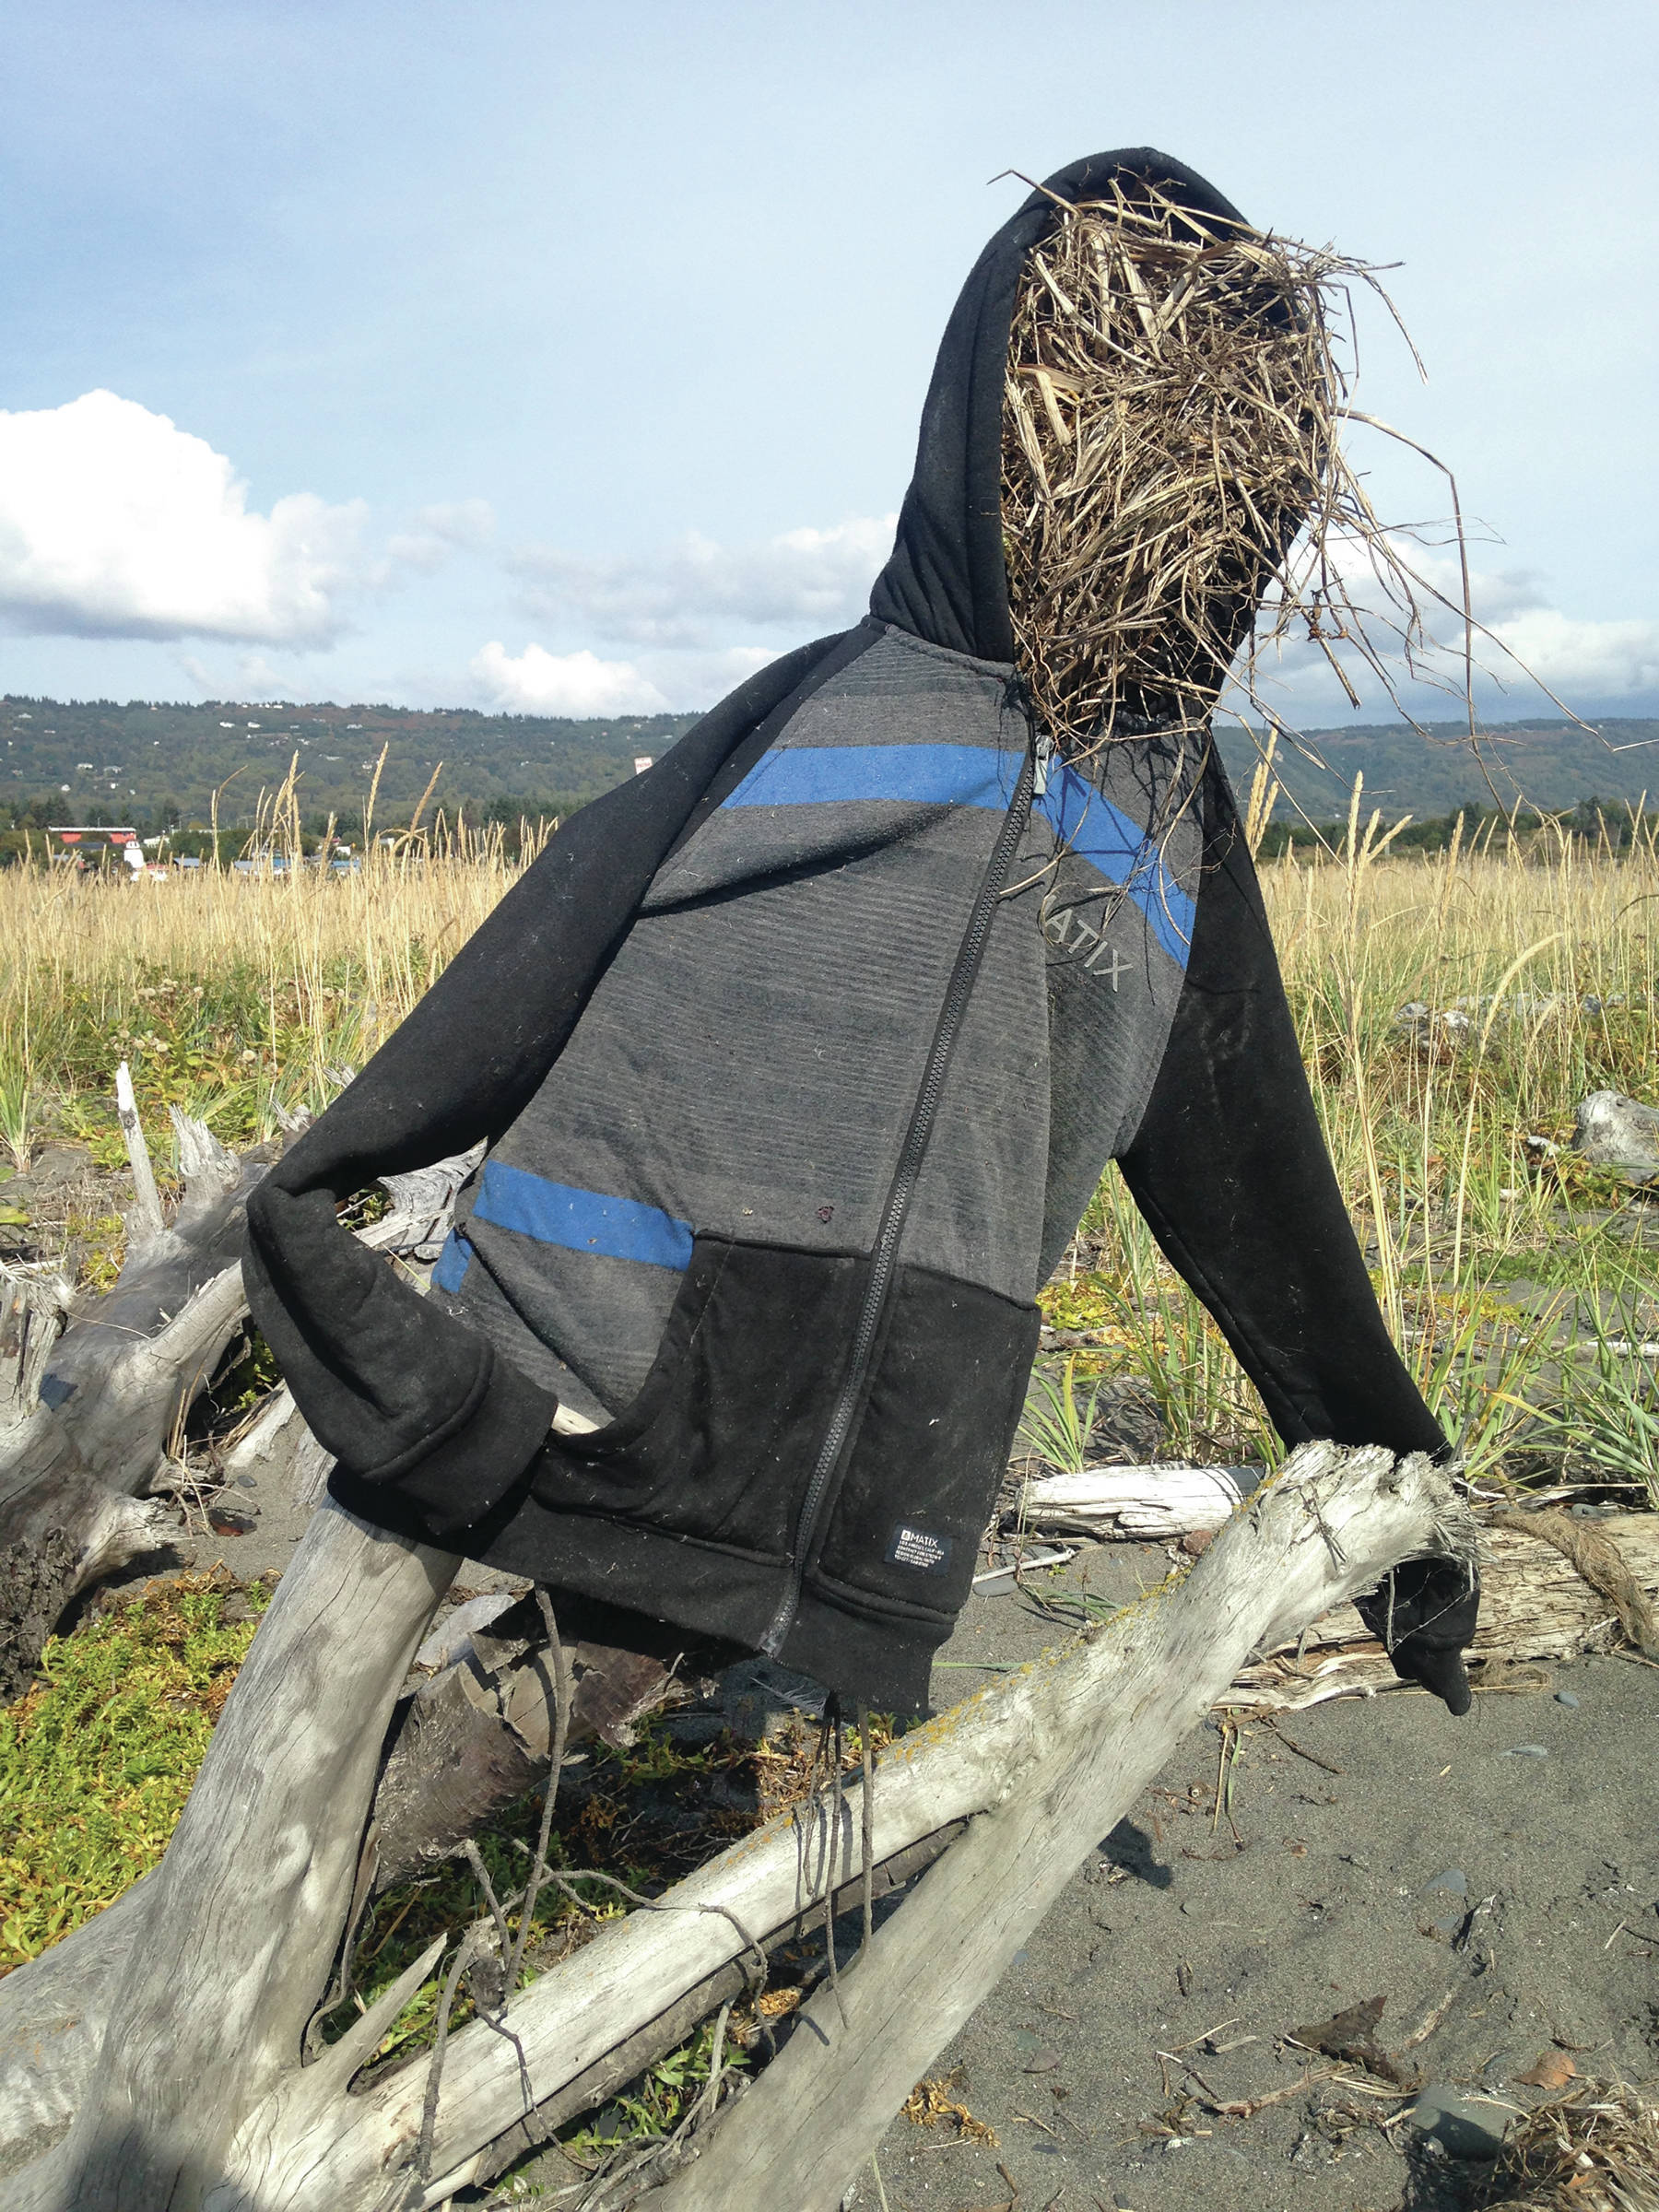 Straw man Someone stuffed with grass a coat that washed up on the Homer Spit beach on Thursday, Sept. 5, 2019, in Homer, Alaska. No crows were observed in the vicinity of the impromptu art. (Photo by Michael Armstrong/Homer News)